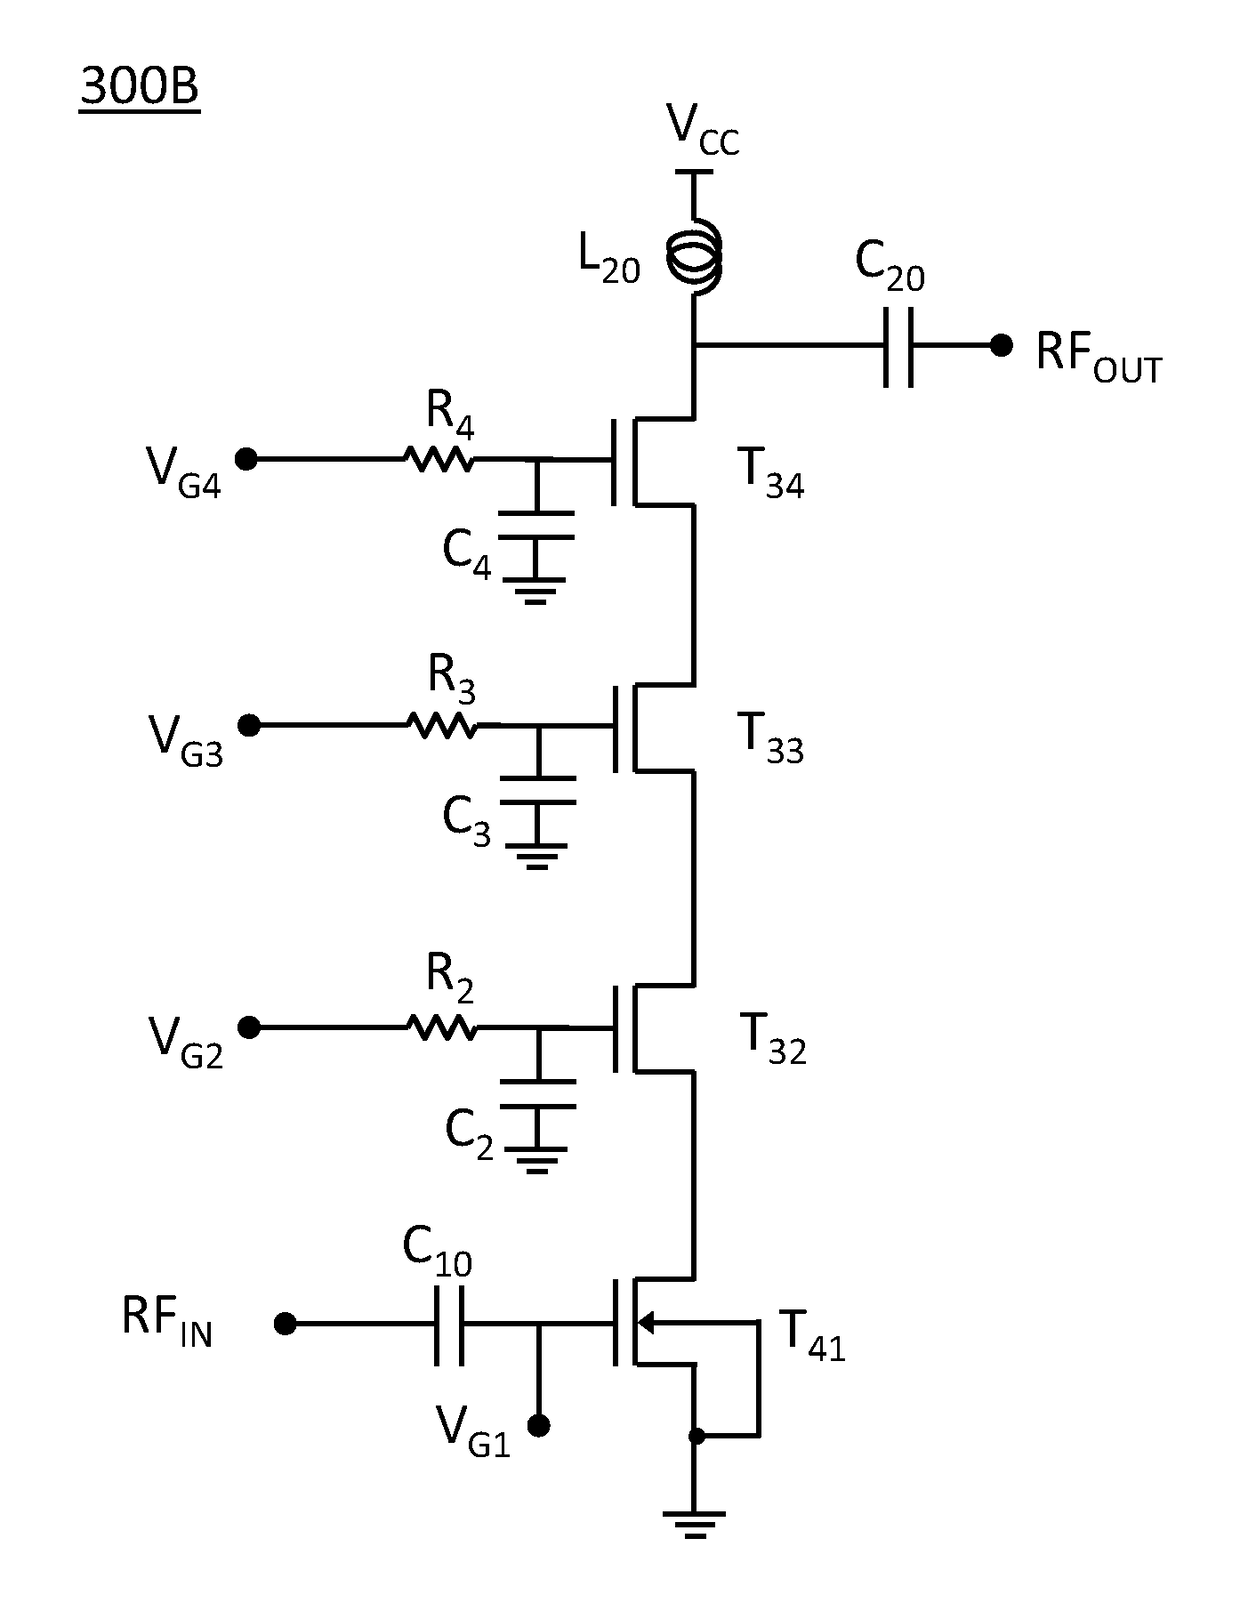 Body tie optimization for stacked transistor amplifier